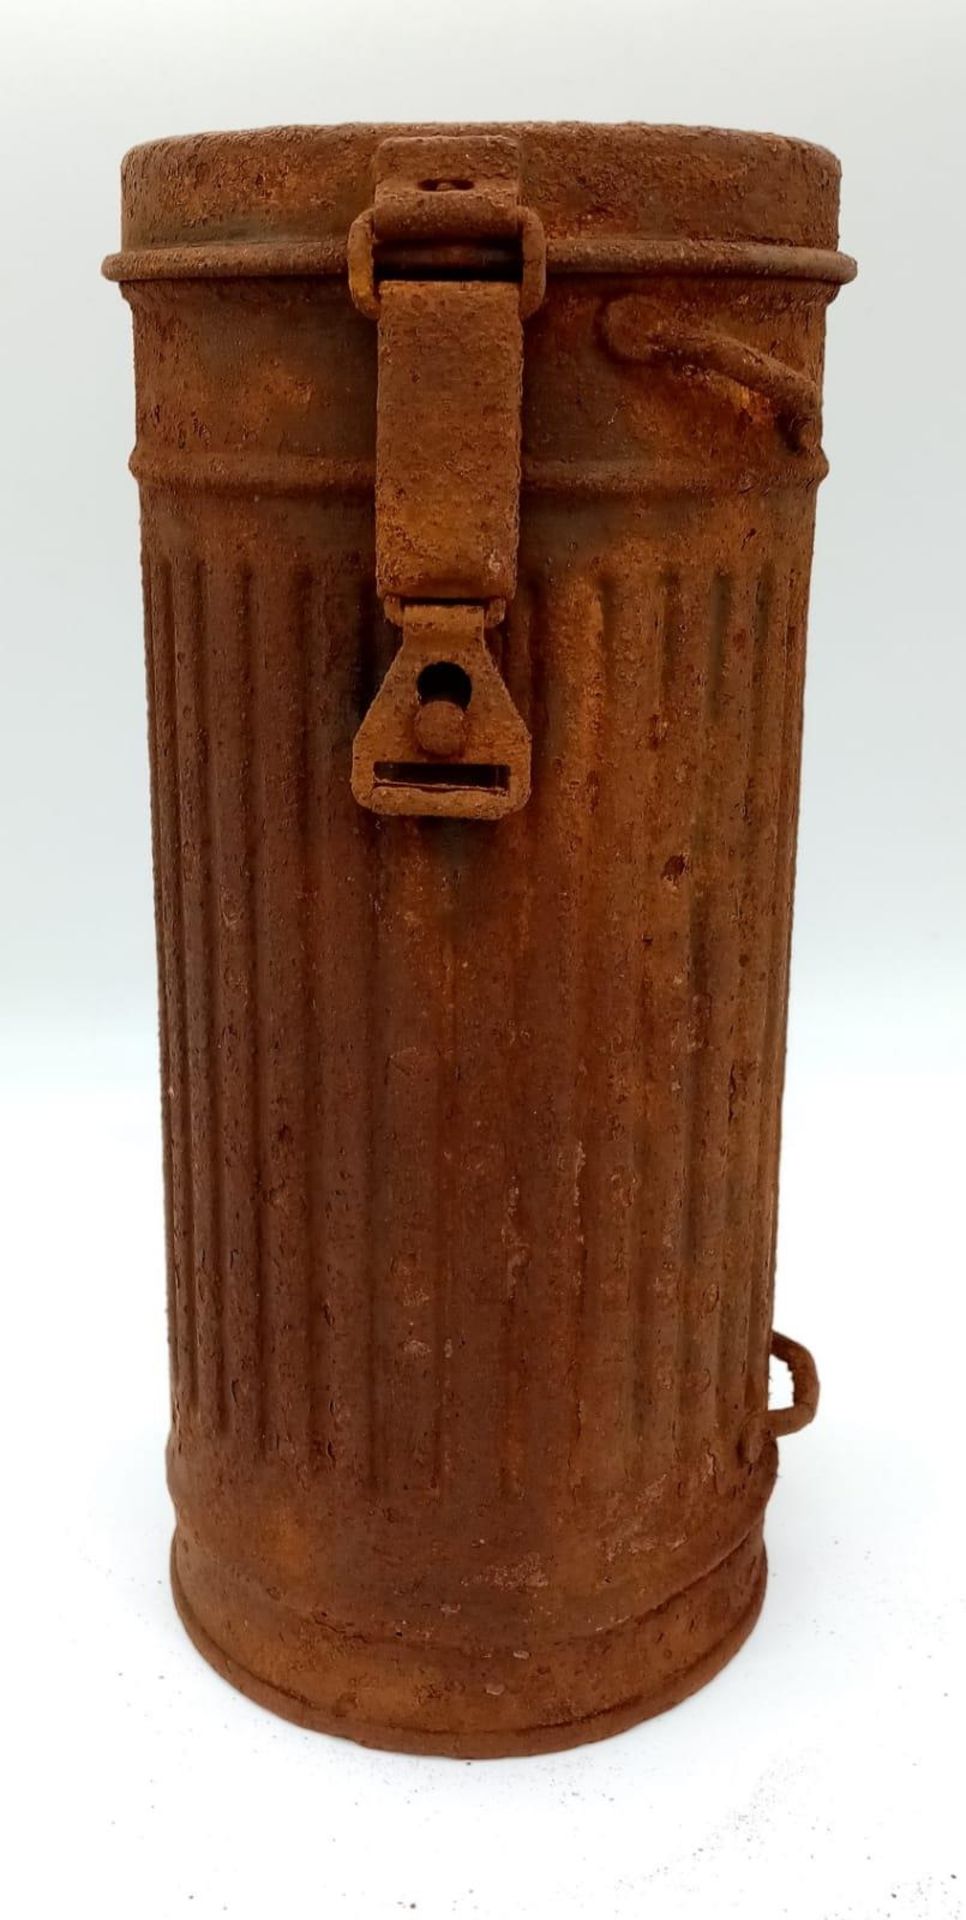 Semi Relic WW2 German Medics Gas Mask Canister. Found in Normandy, France.